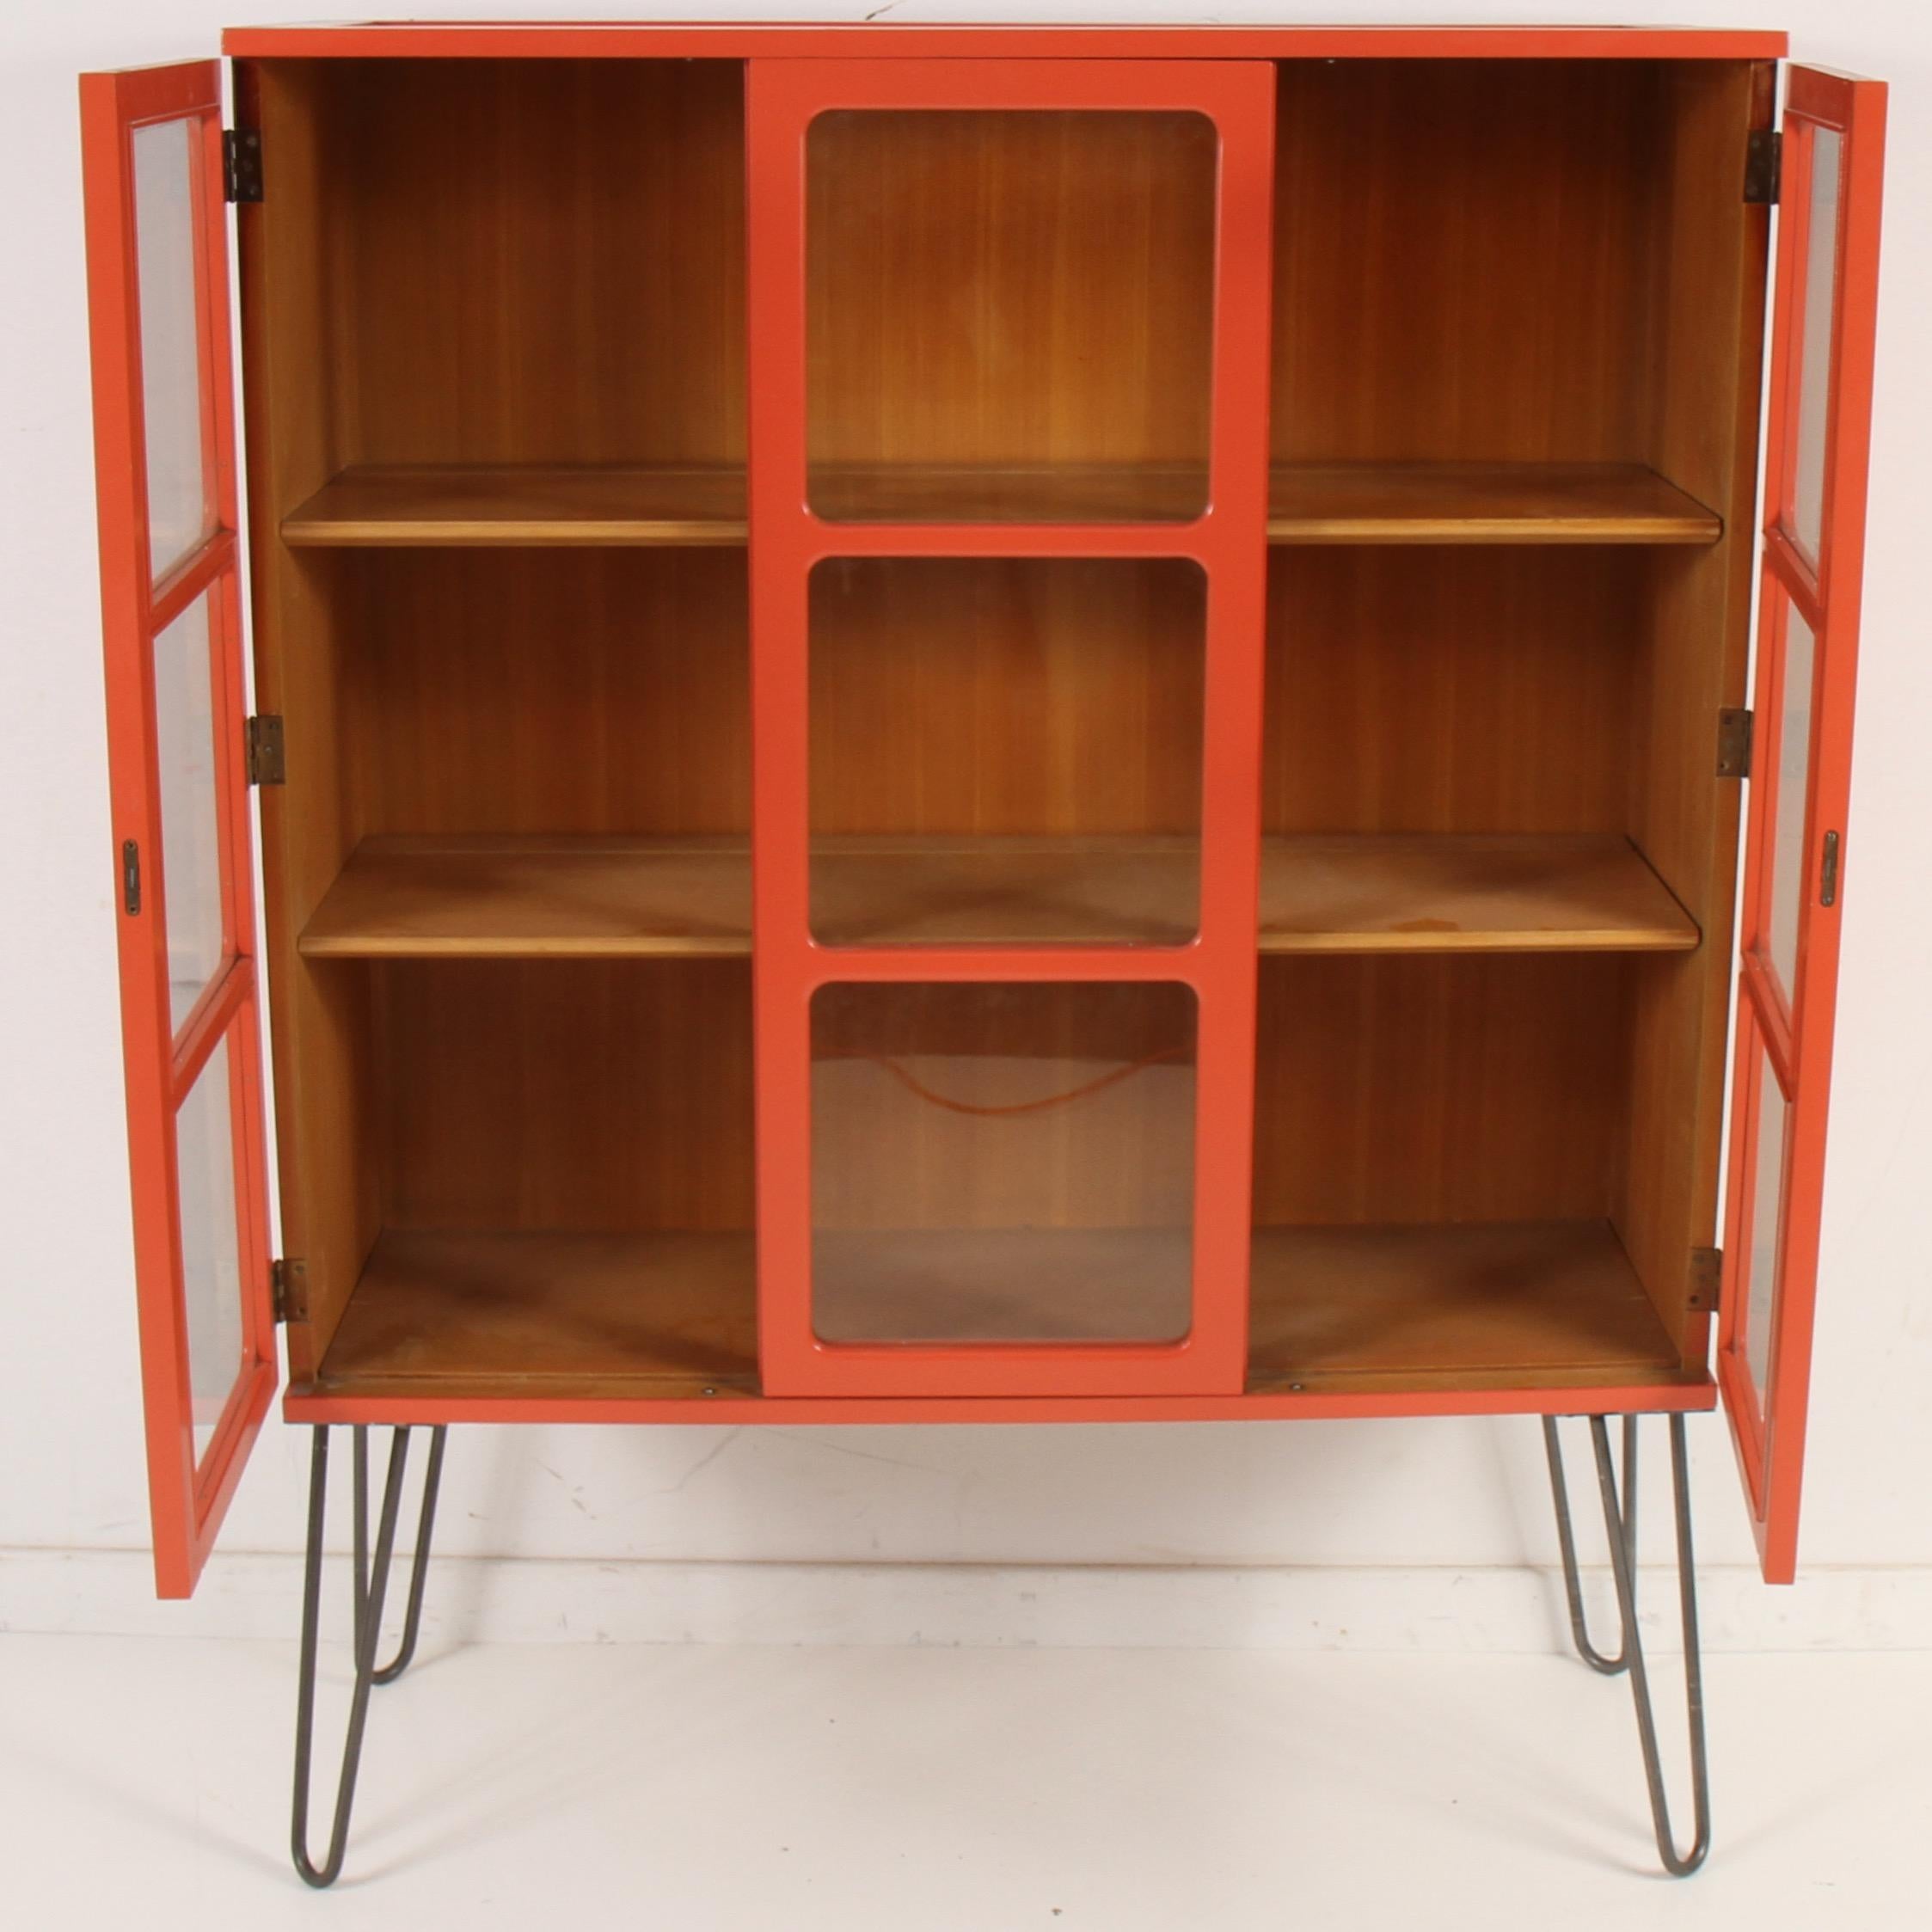 A clean vintage piece re-invented for another generation. Lacquered in orange and given a new lease on life as a bookcase on sturdy hairpin legs. 

Edward Wormley (1907-1995) created many Classic furniture designs throughout the 1940s, 1950s, and